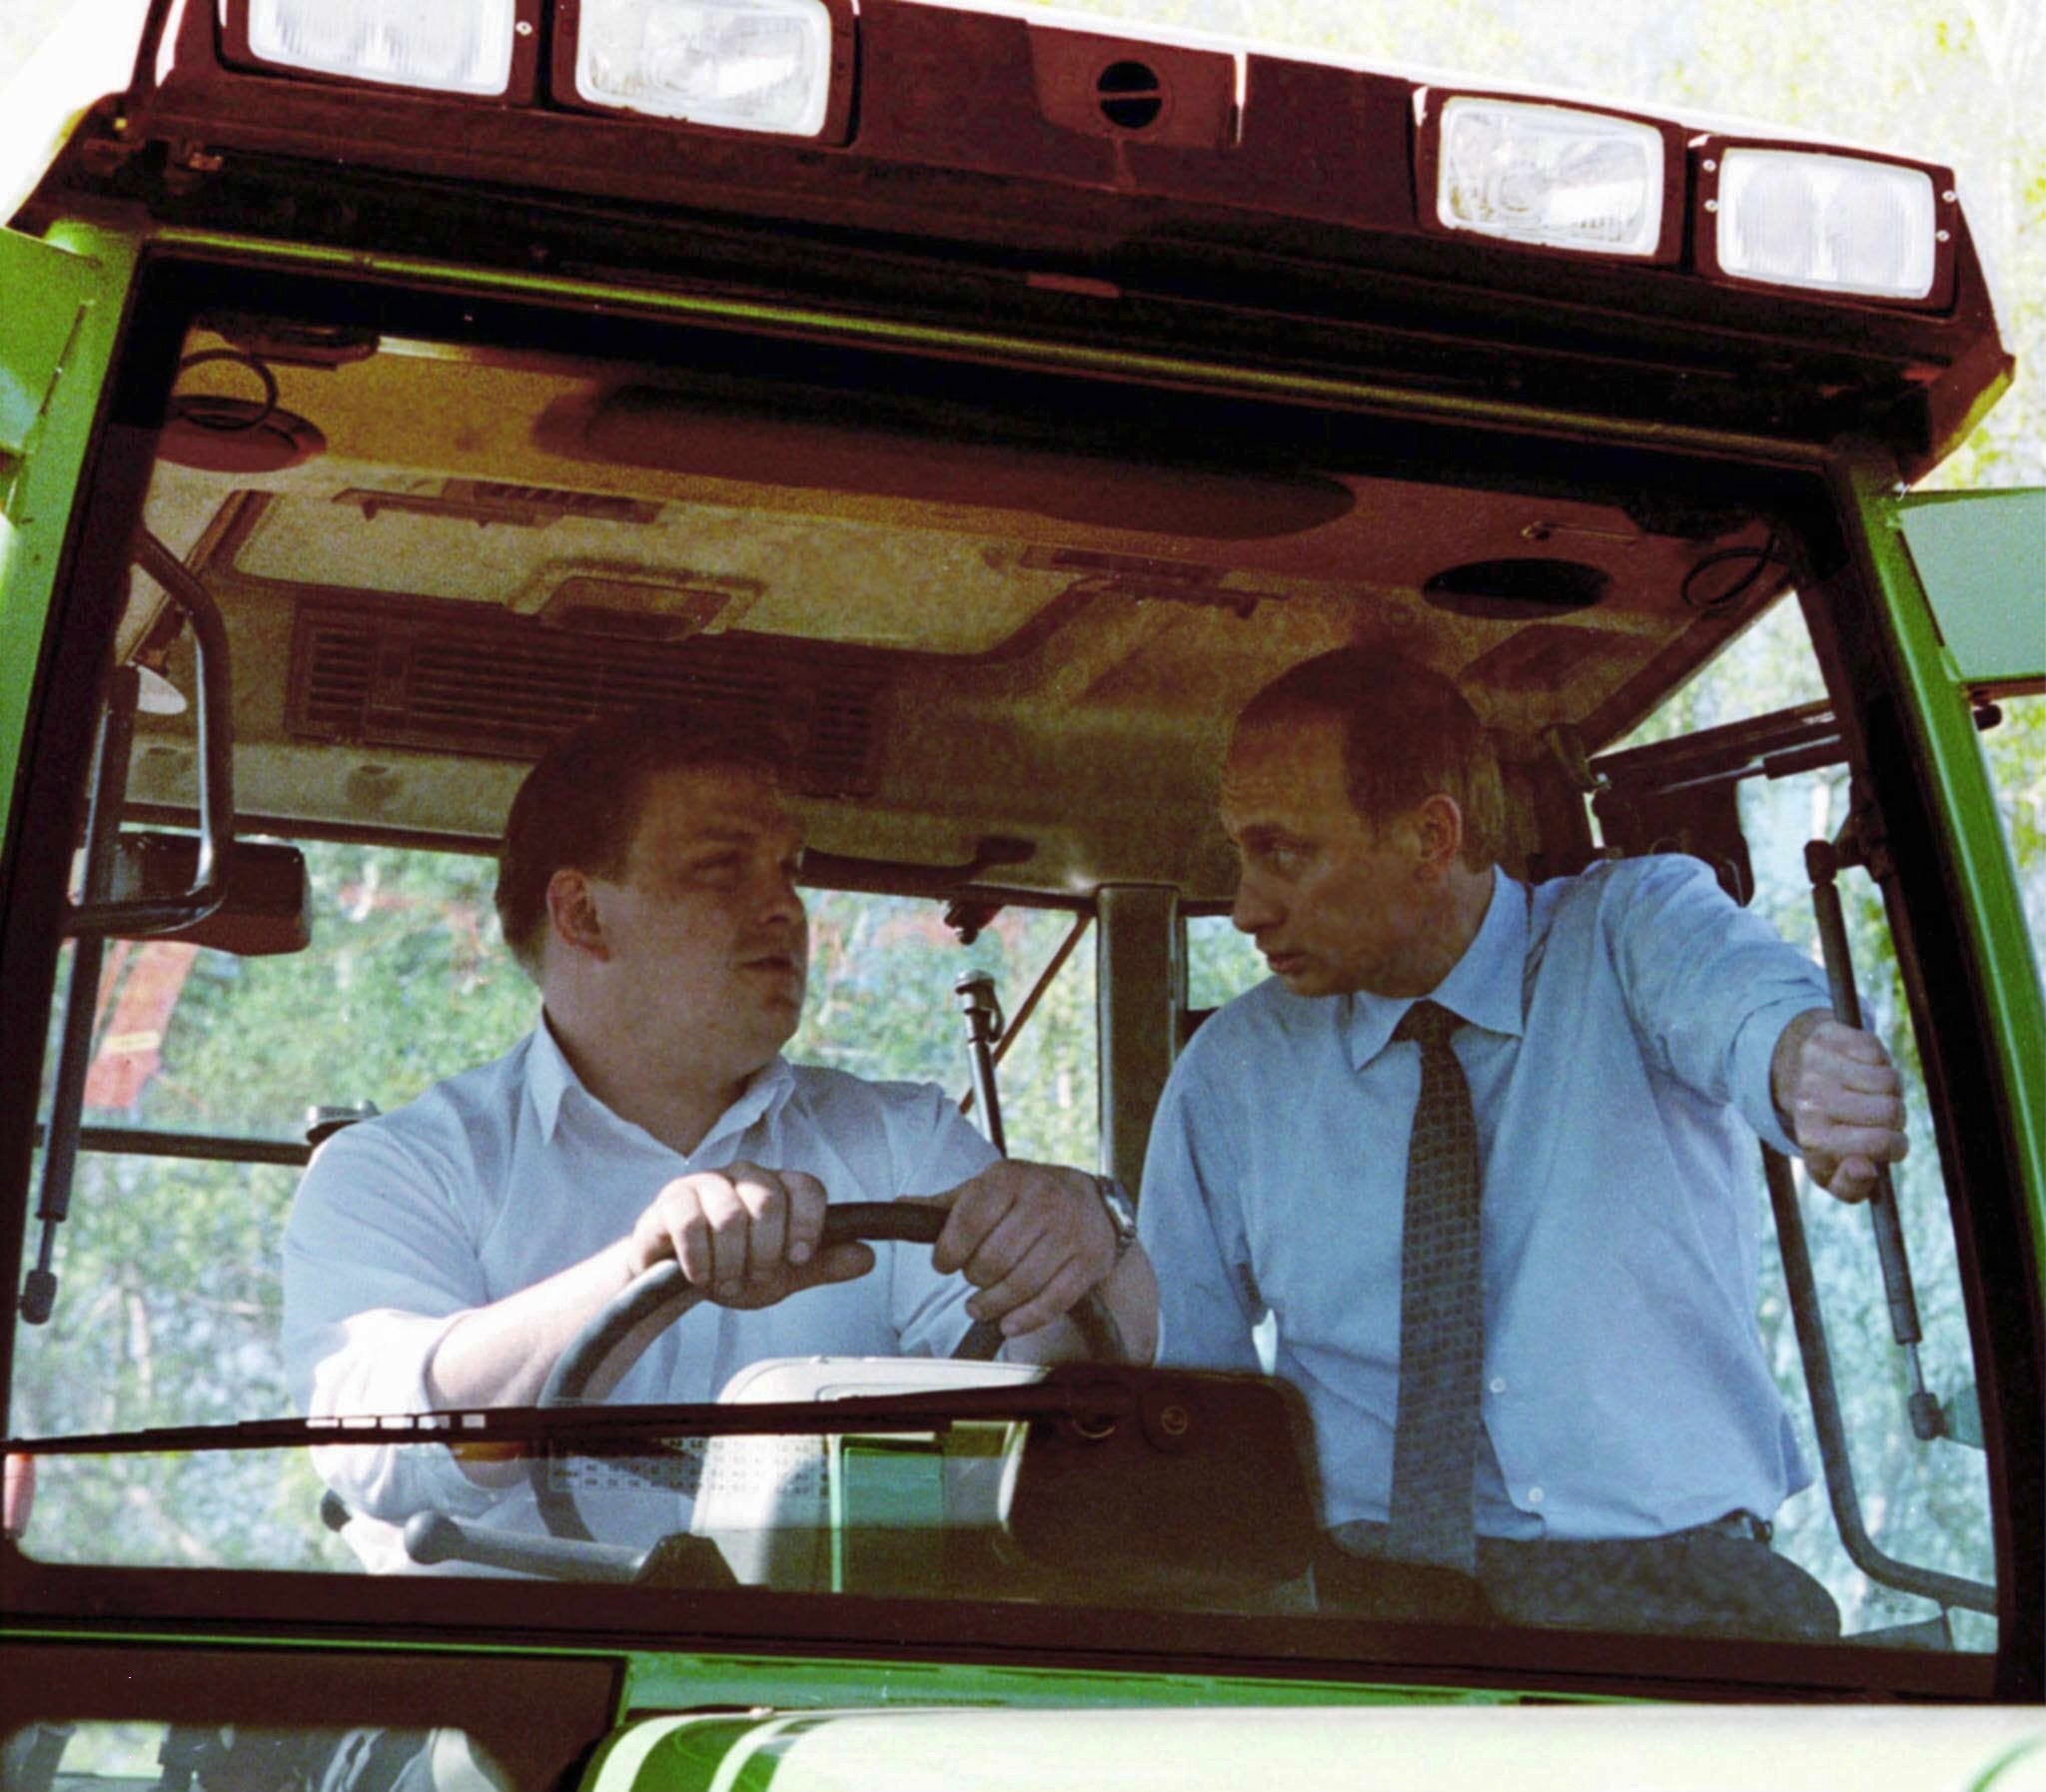 Vladimir Putin sits in a tractor while visiting the Russian village of Baklanovo in April 2000